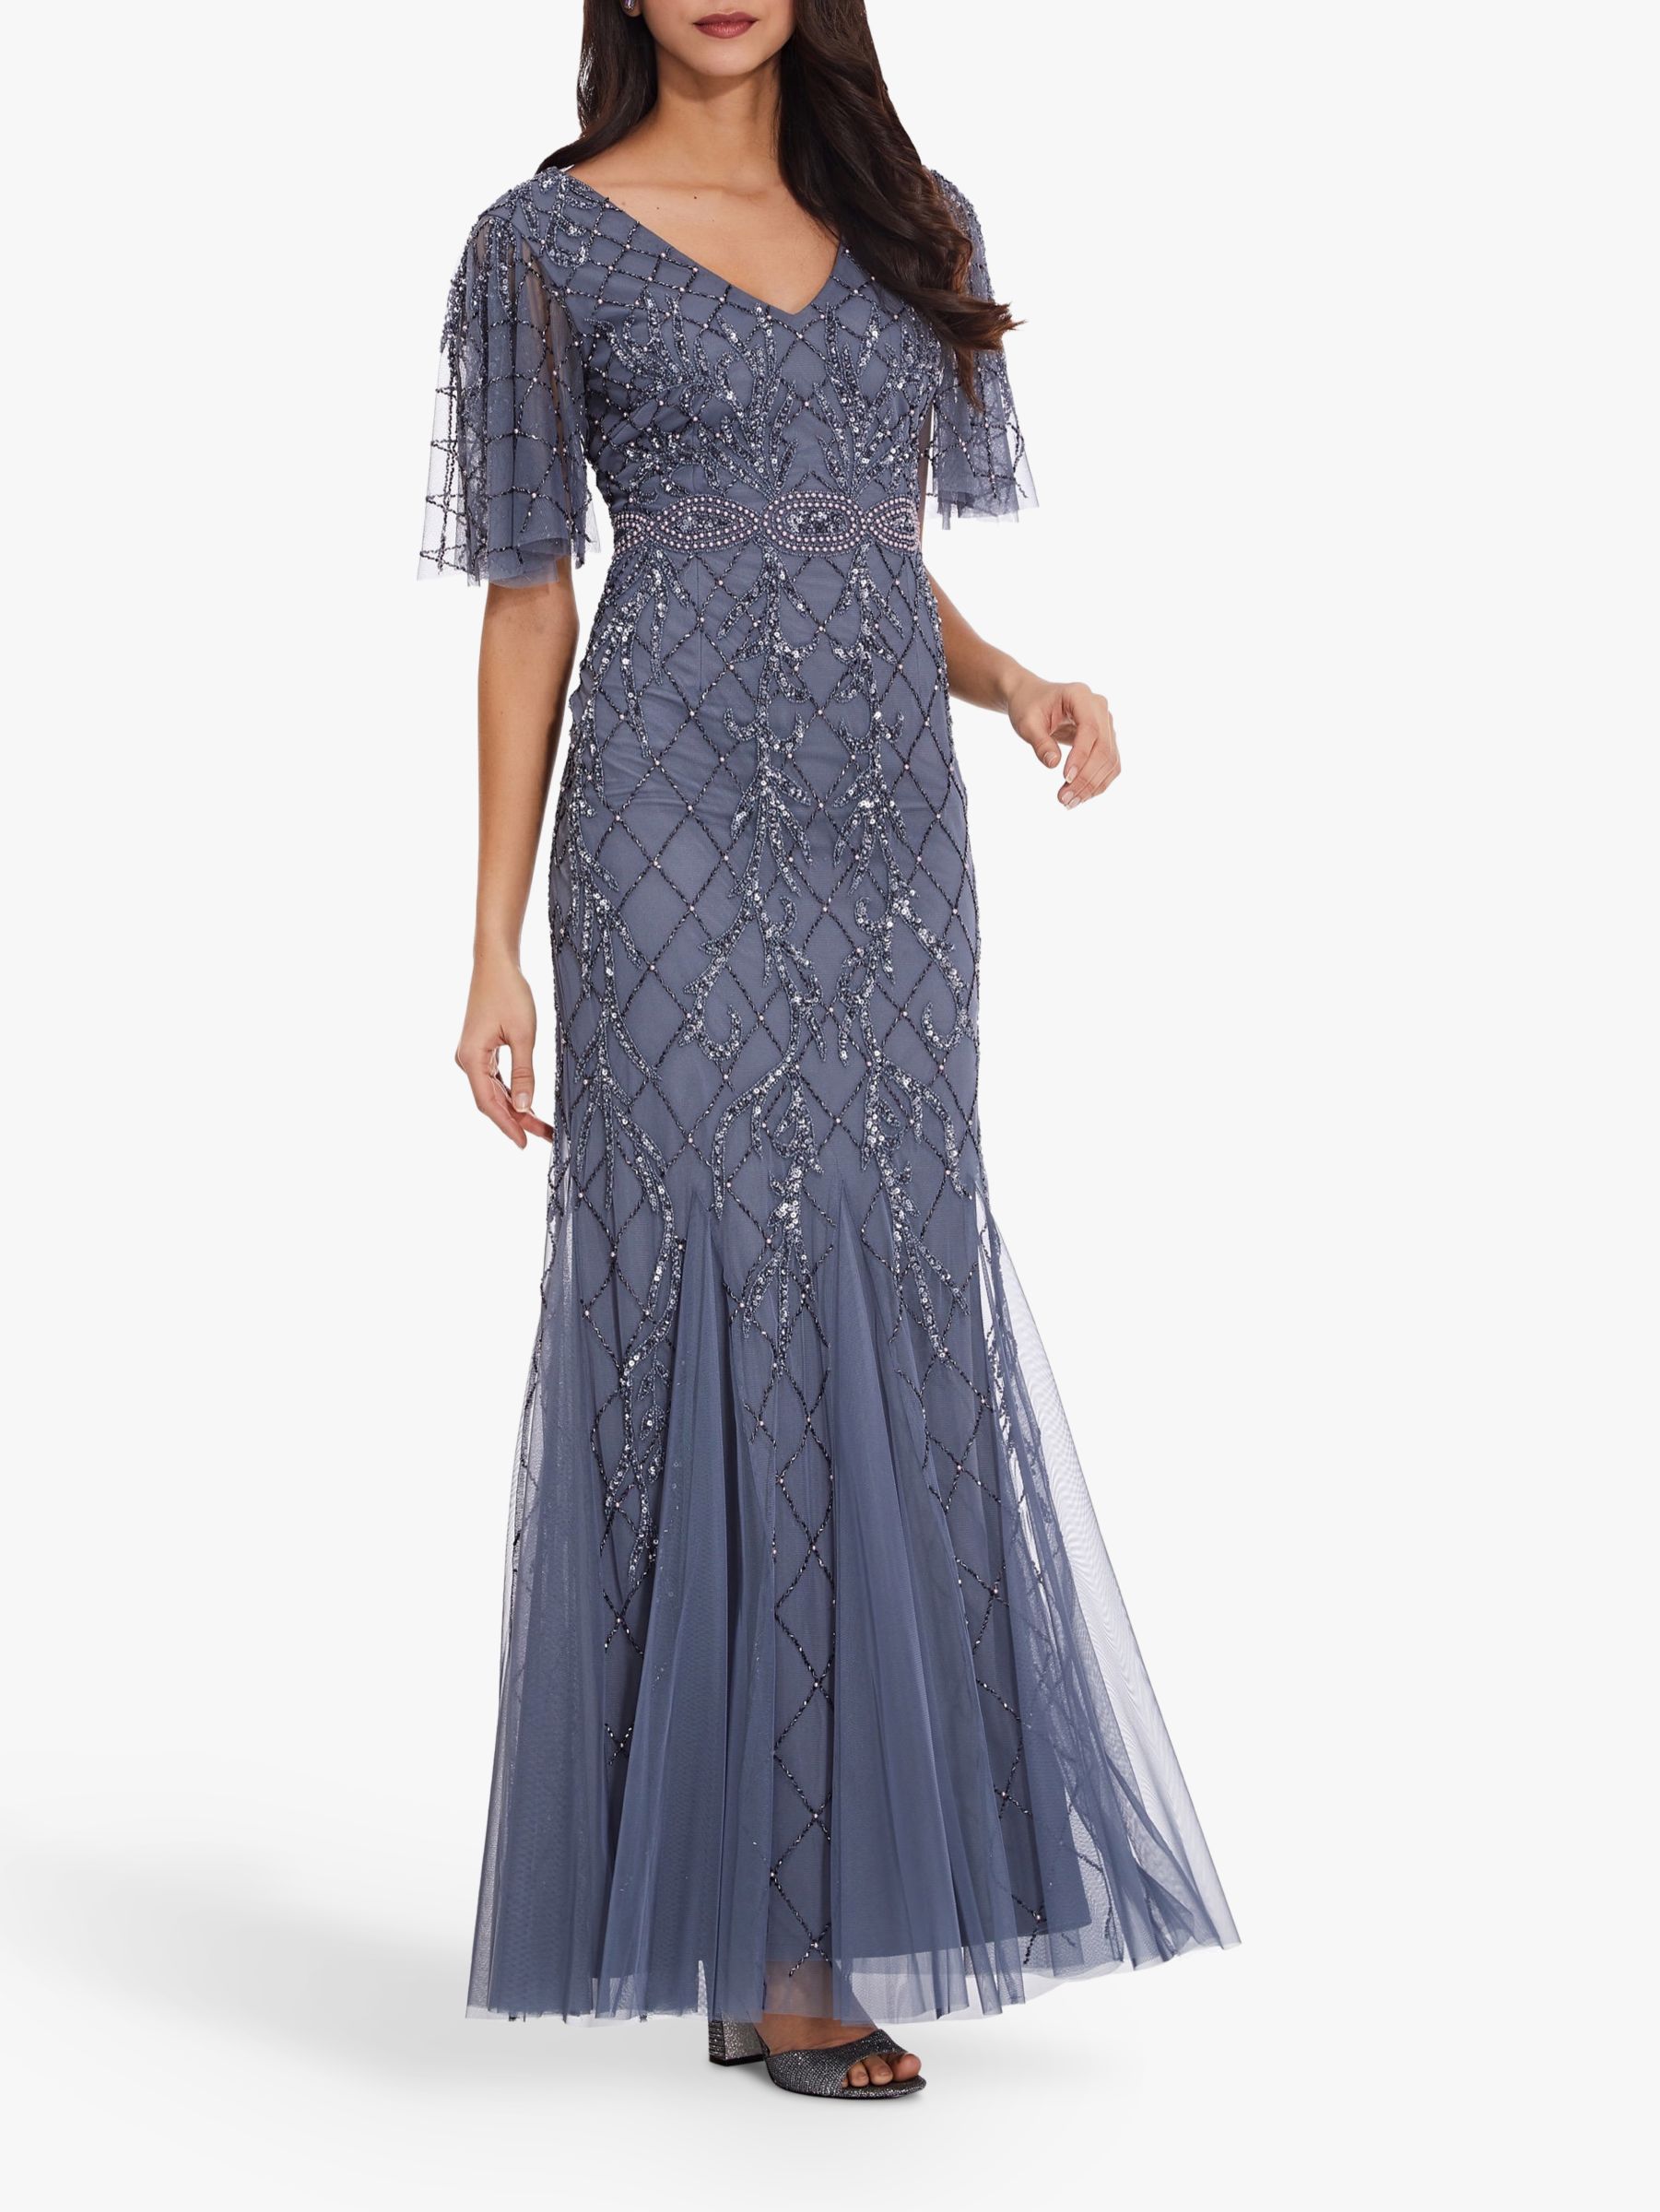 Adrianna Papell Covered Bead Gown, Dusty Blue at John Lewis & Partners